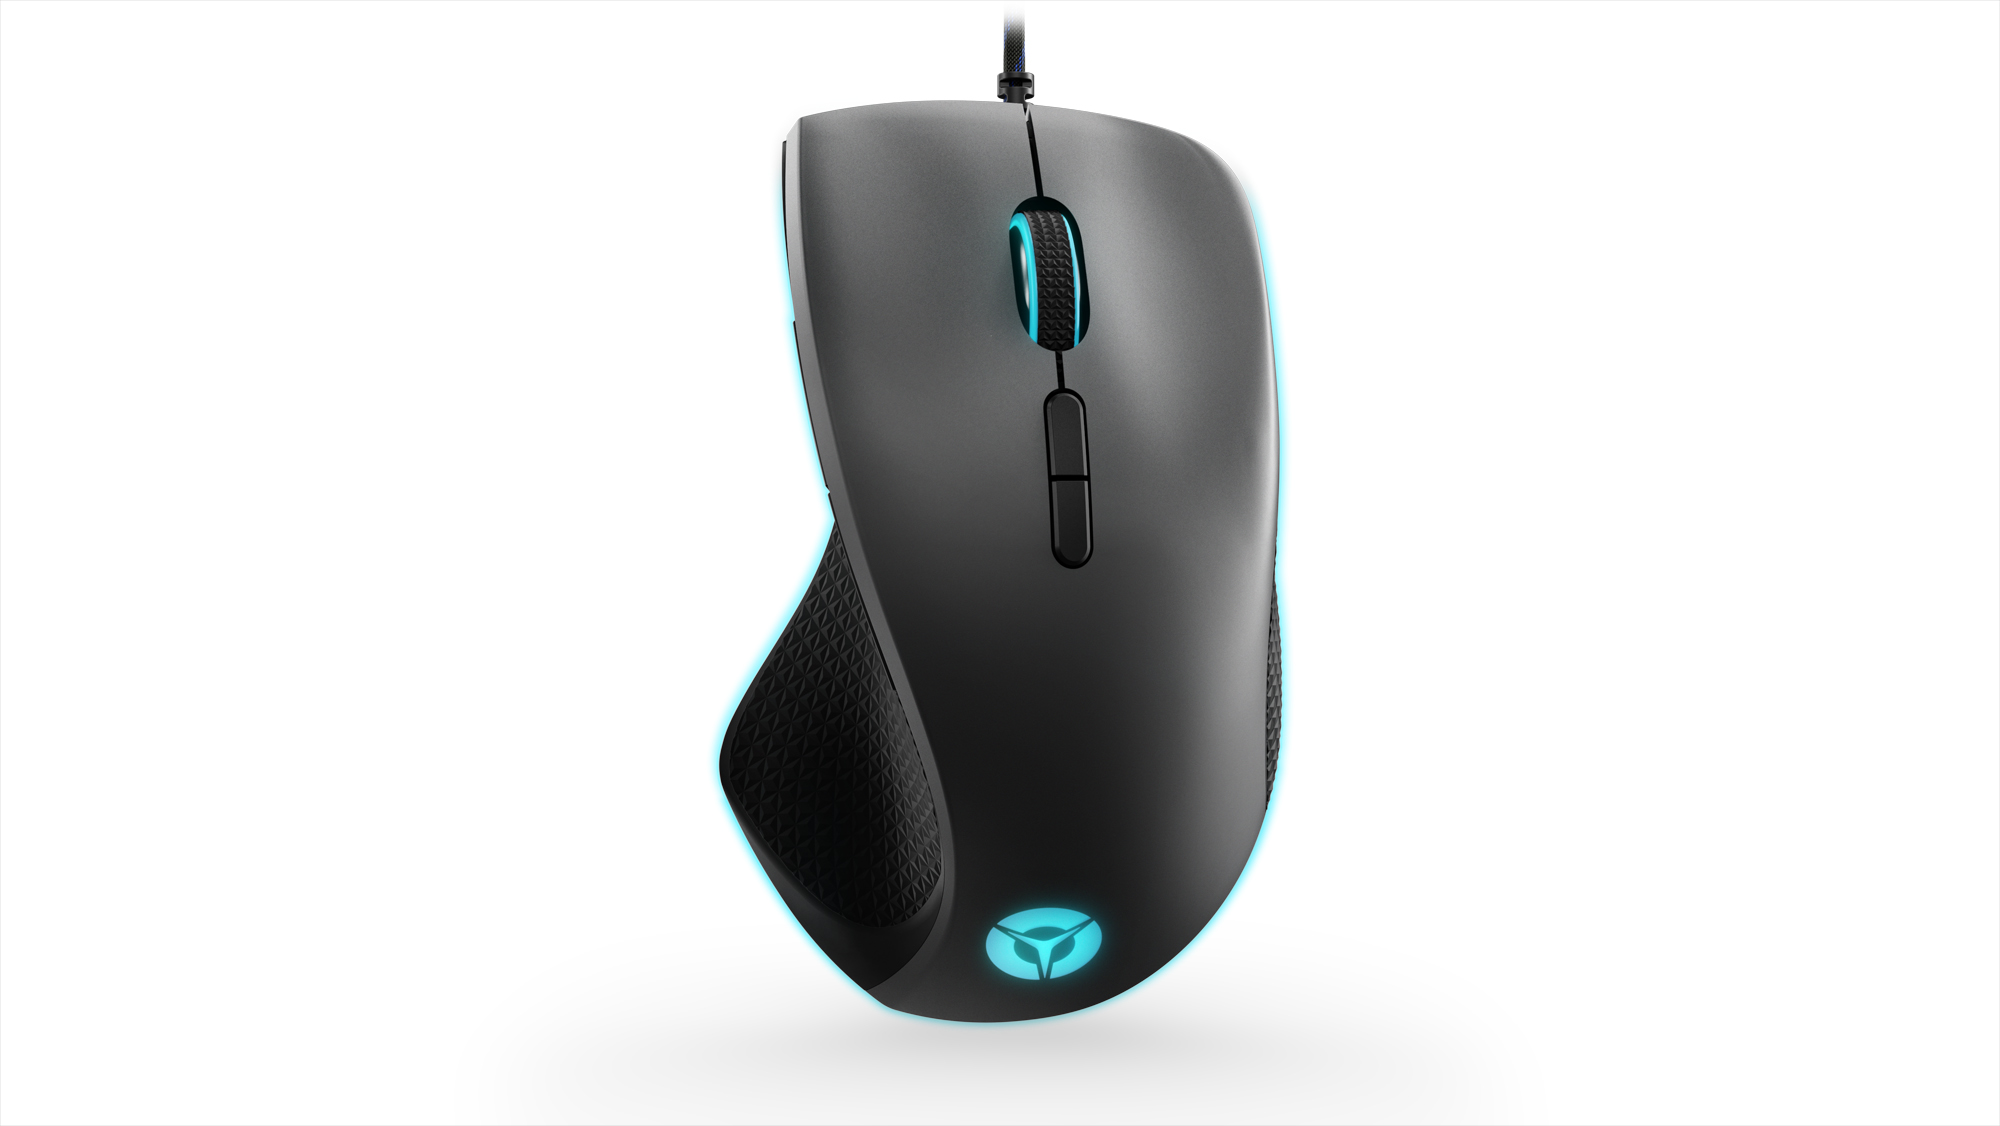 lenovo announce new legion gaming peripherals ces 2019 03 m500 omron micro switches with 50 million clicks blue glow